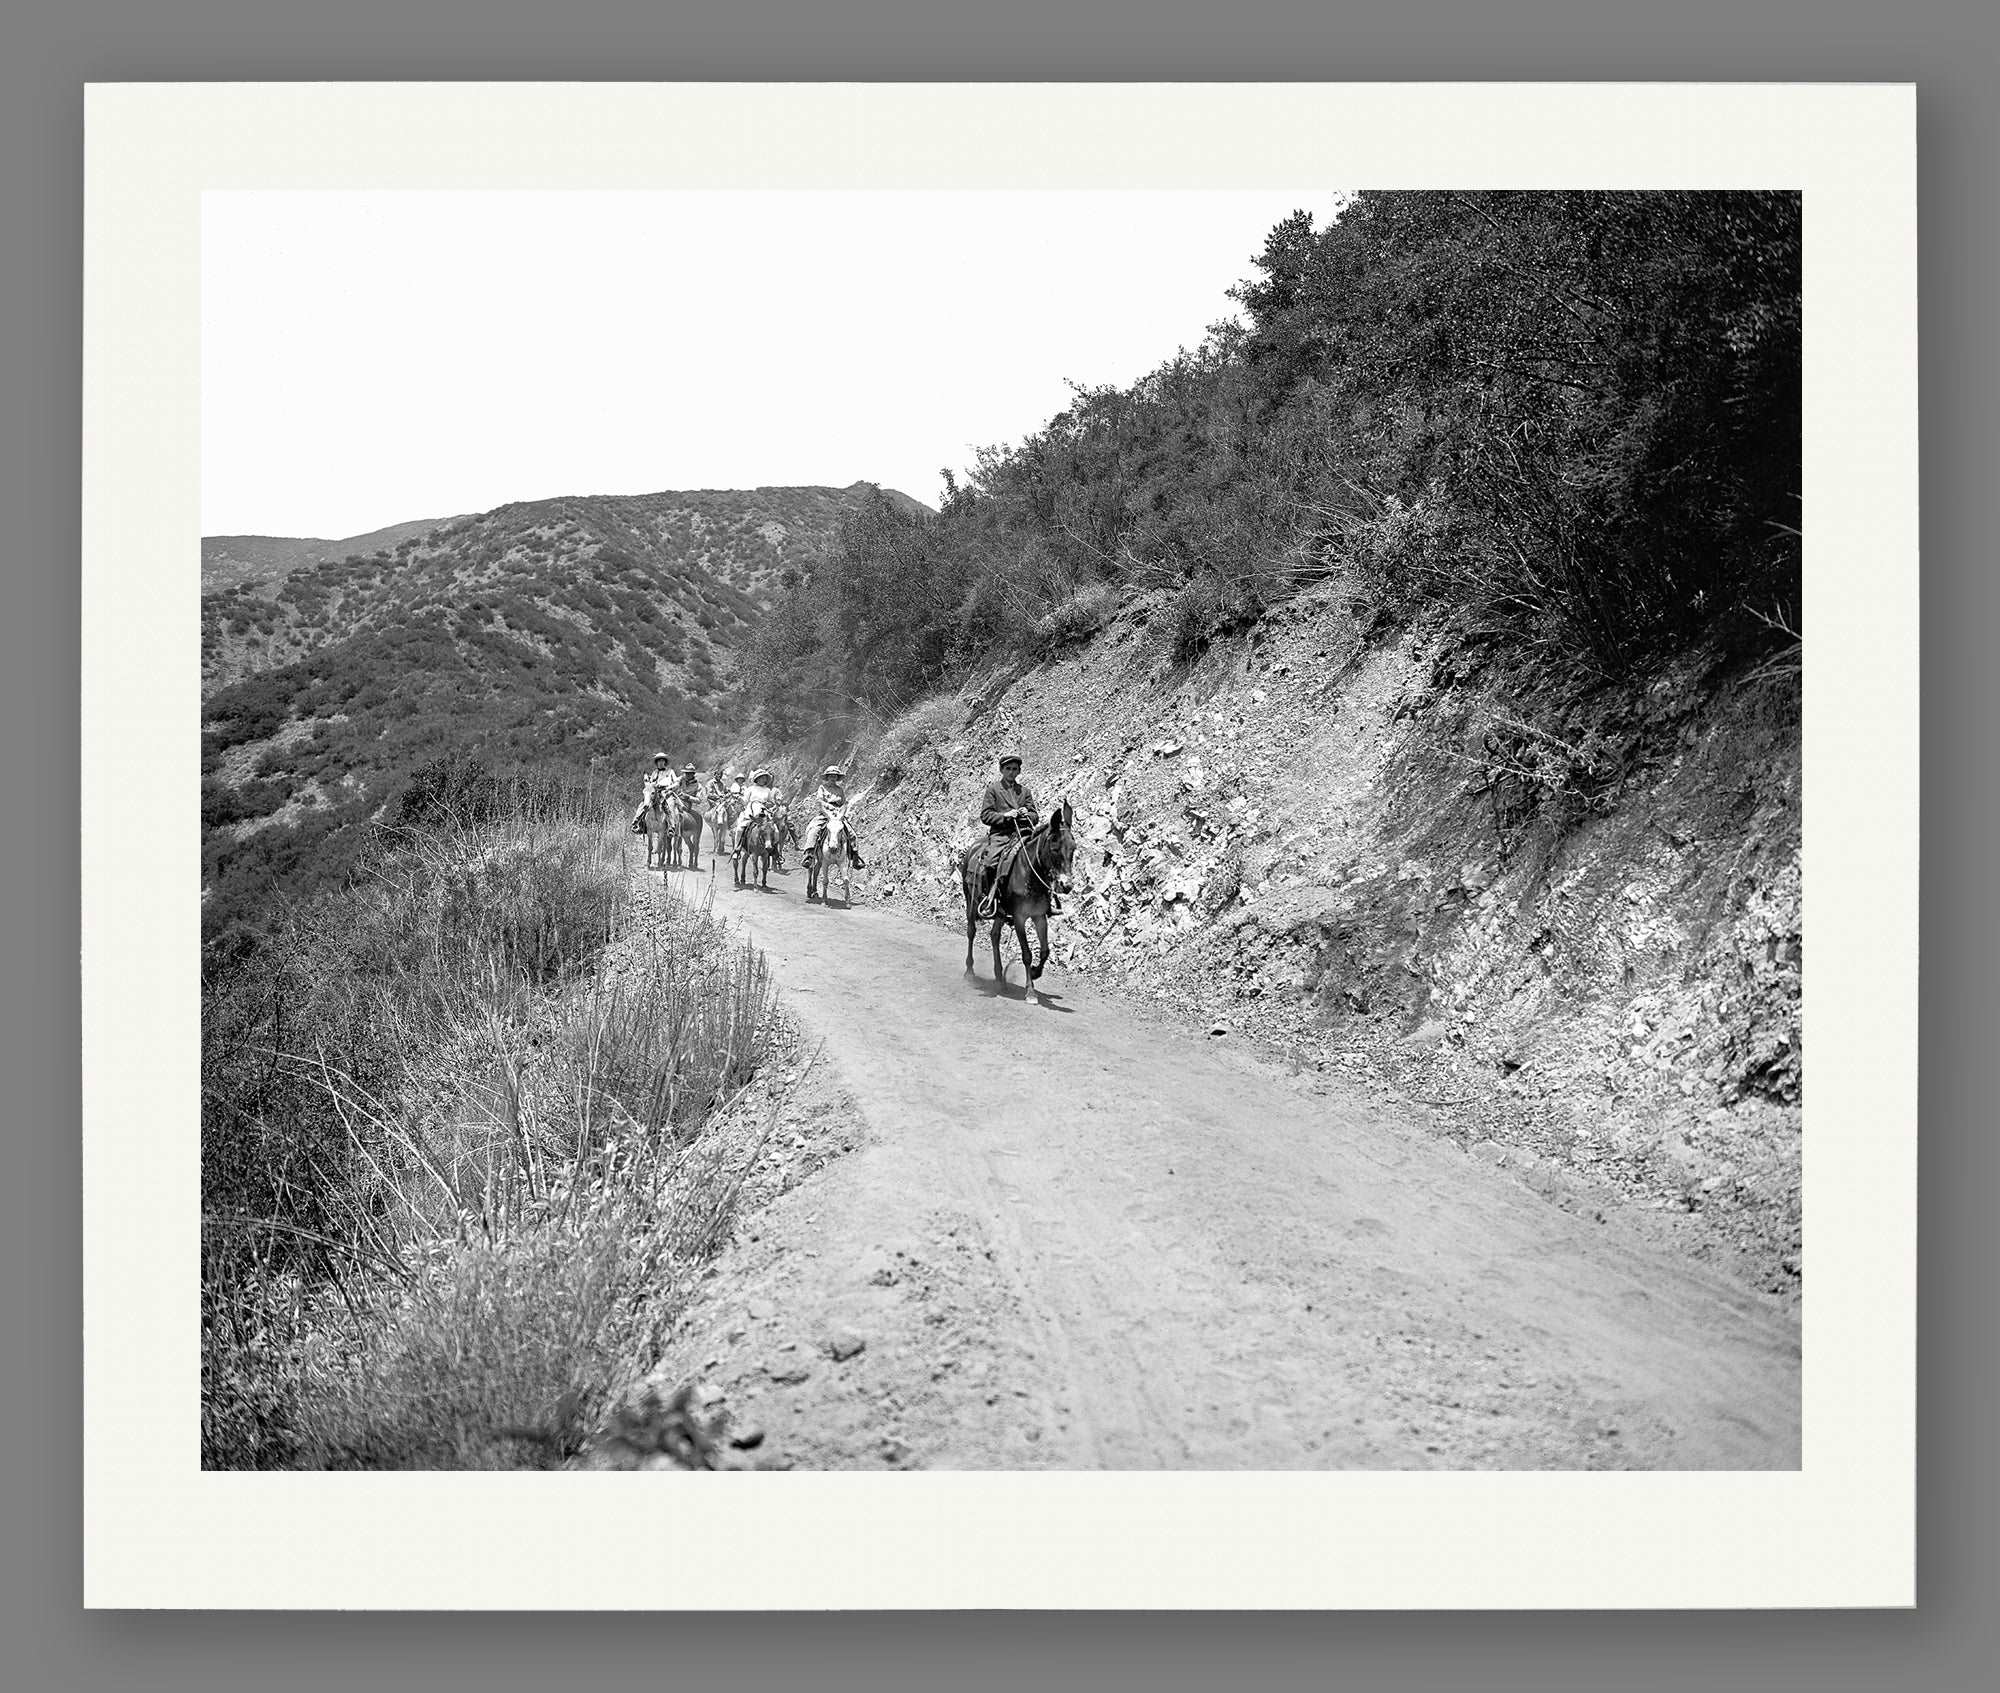 A fine art paper print of vintage photography of a group on horseback on a trail